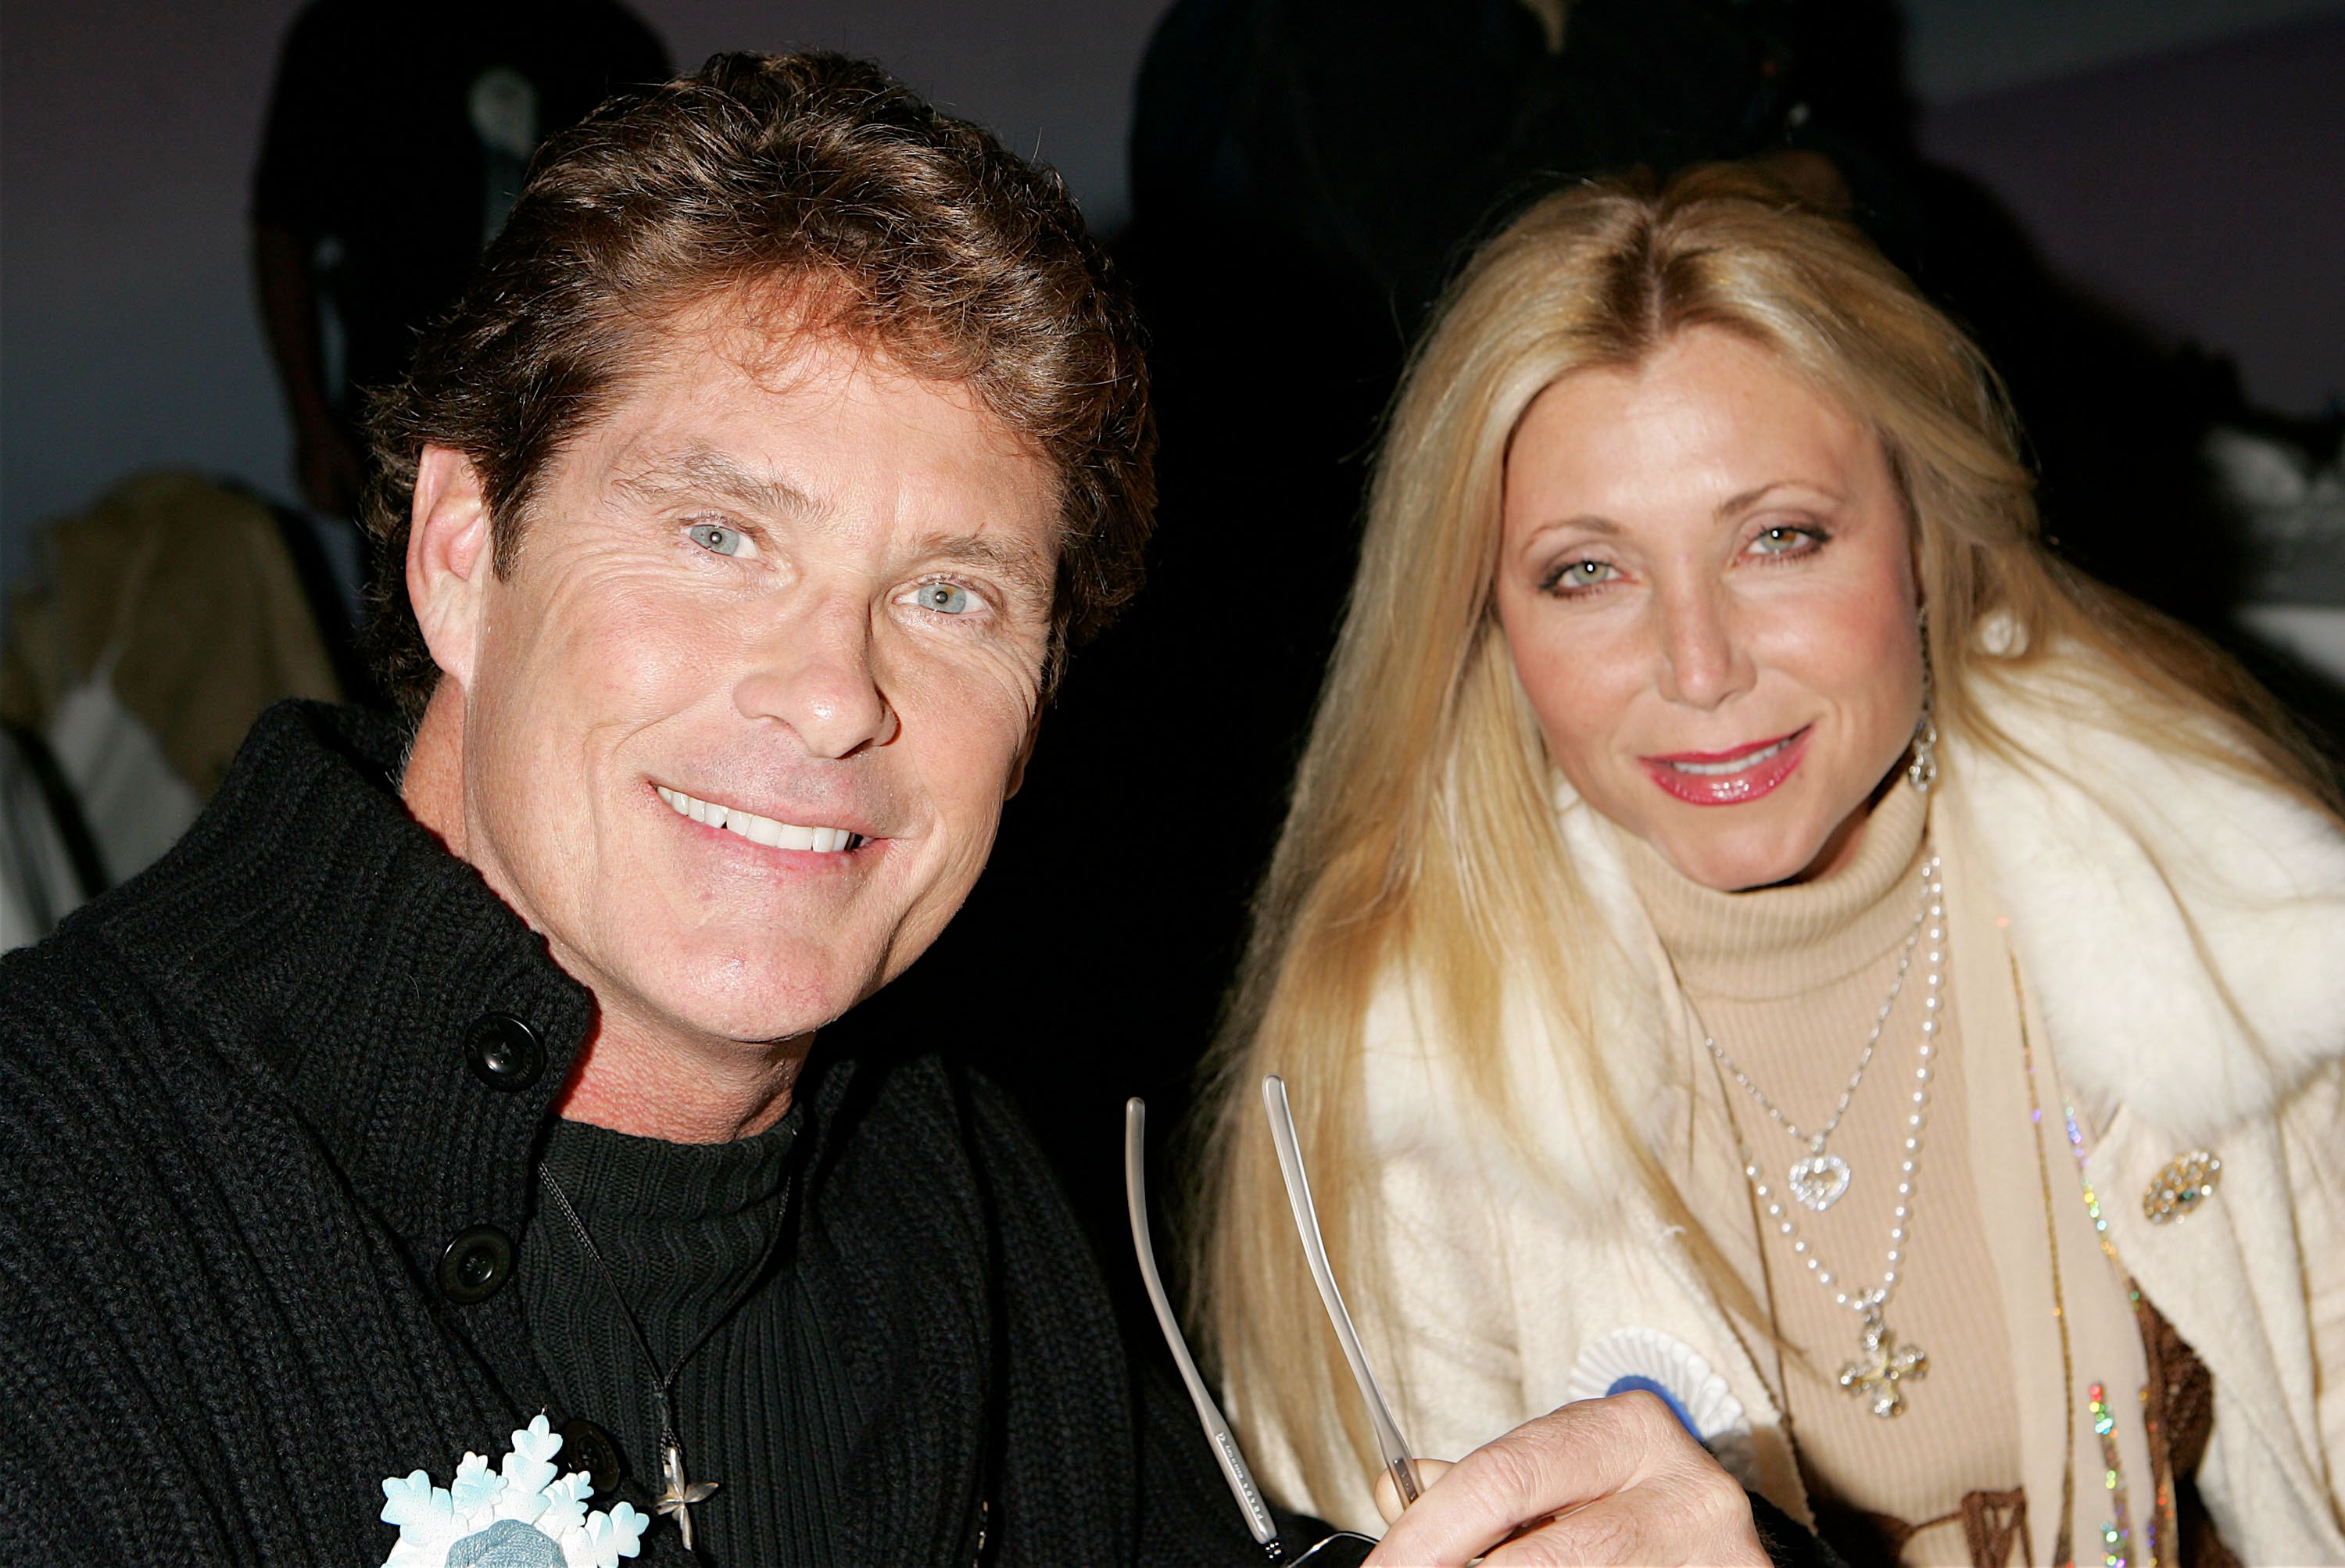 David Hasselhoff and Pamela Bach-Hasselhoff at the 2005 Hollywood Christmas Parade | Source: Getty Images